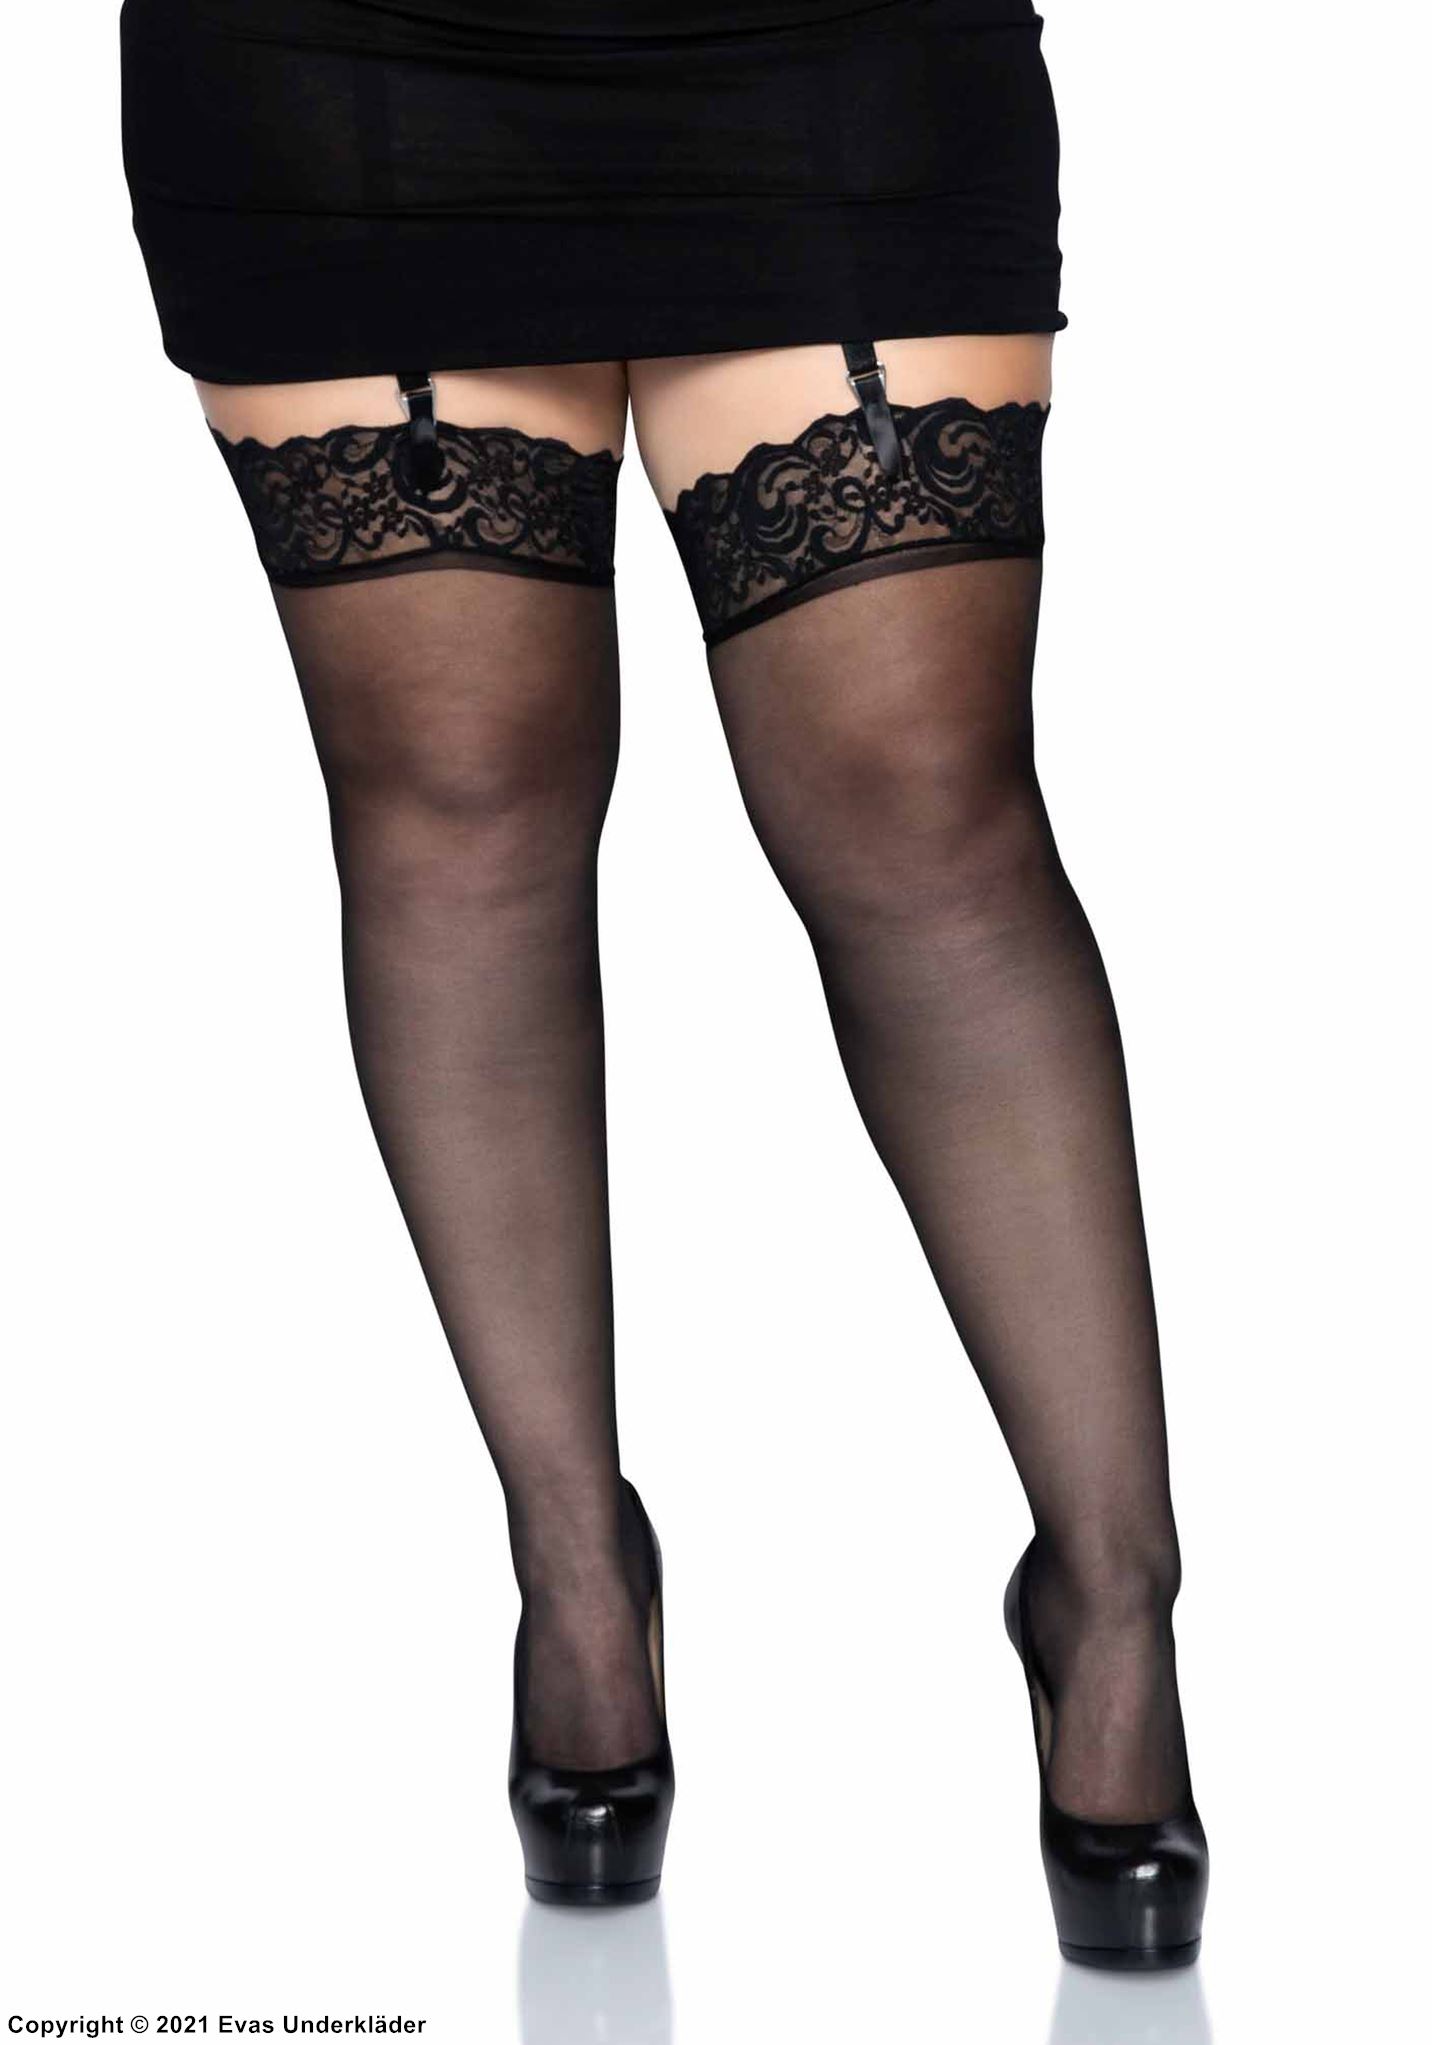 Thigh high stockings, lace edge, plus size